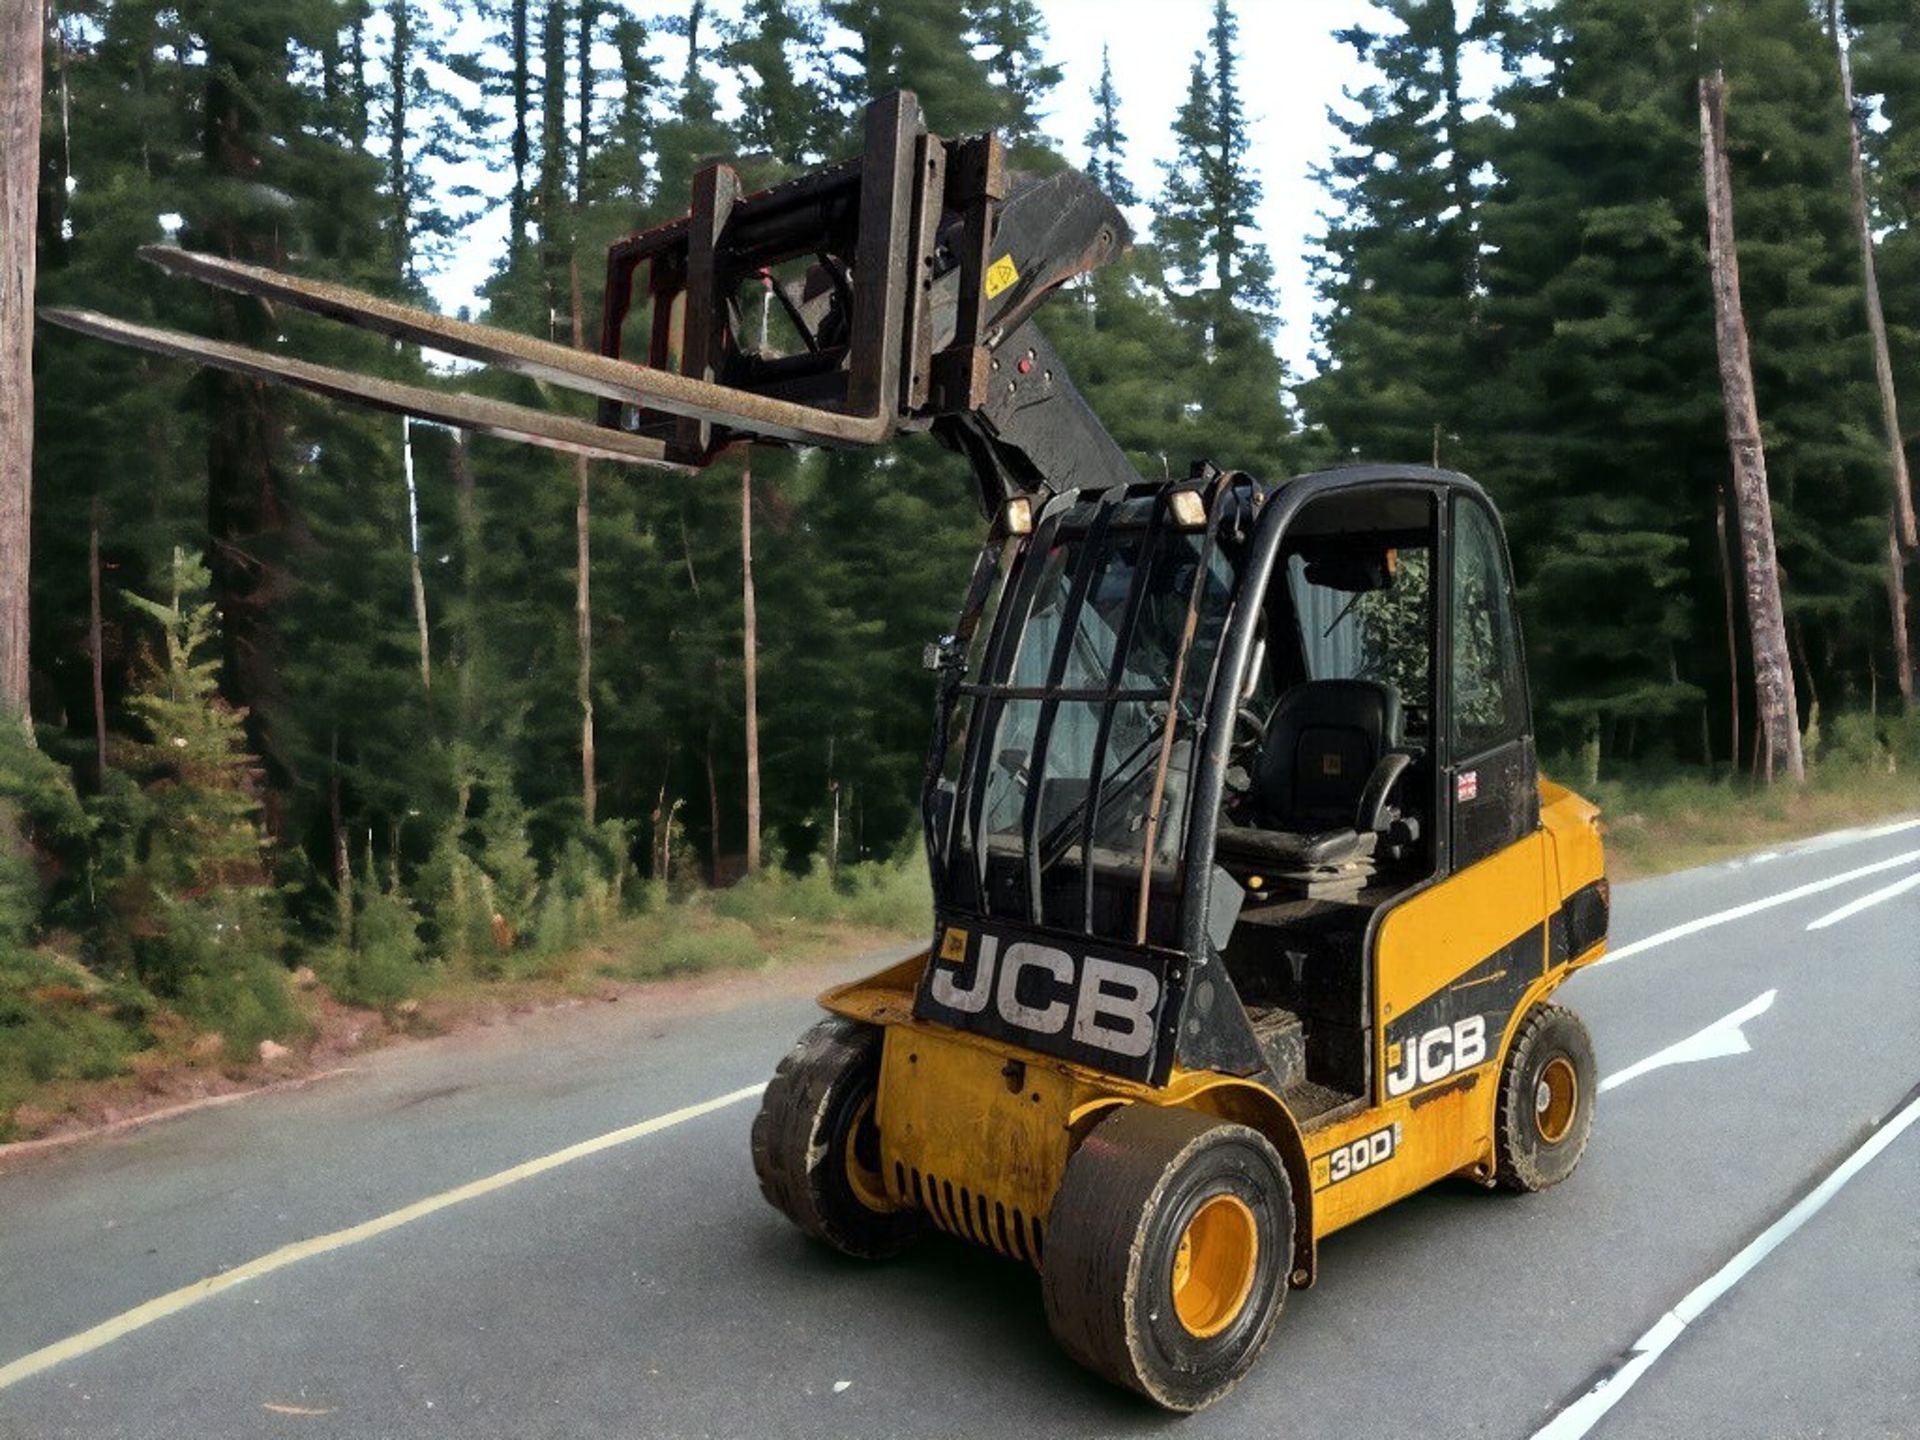 2014 JCB TELETRUK TLT30D TELEHANDLER - RELIABLE, EFFICIENT, AND READY TO WORK - Image 2 of 9